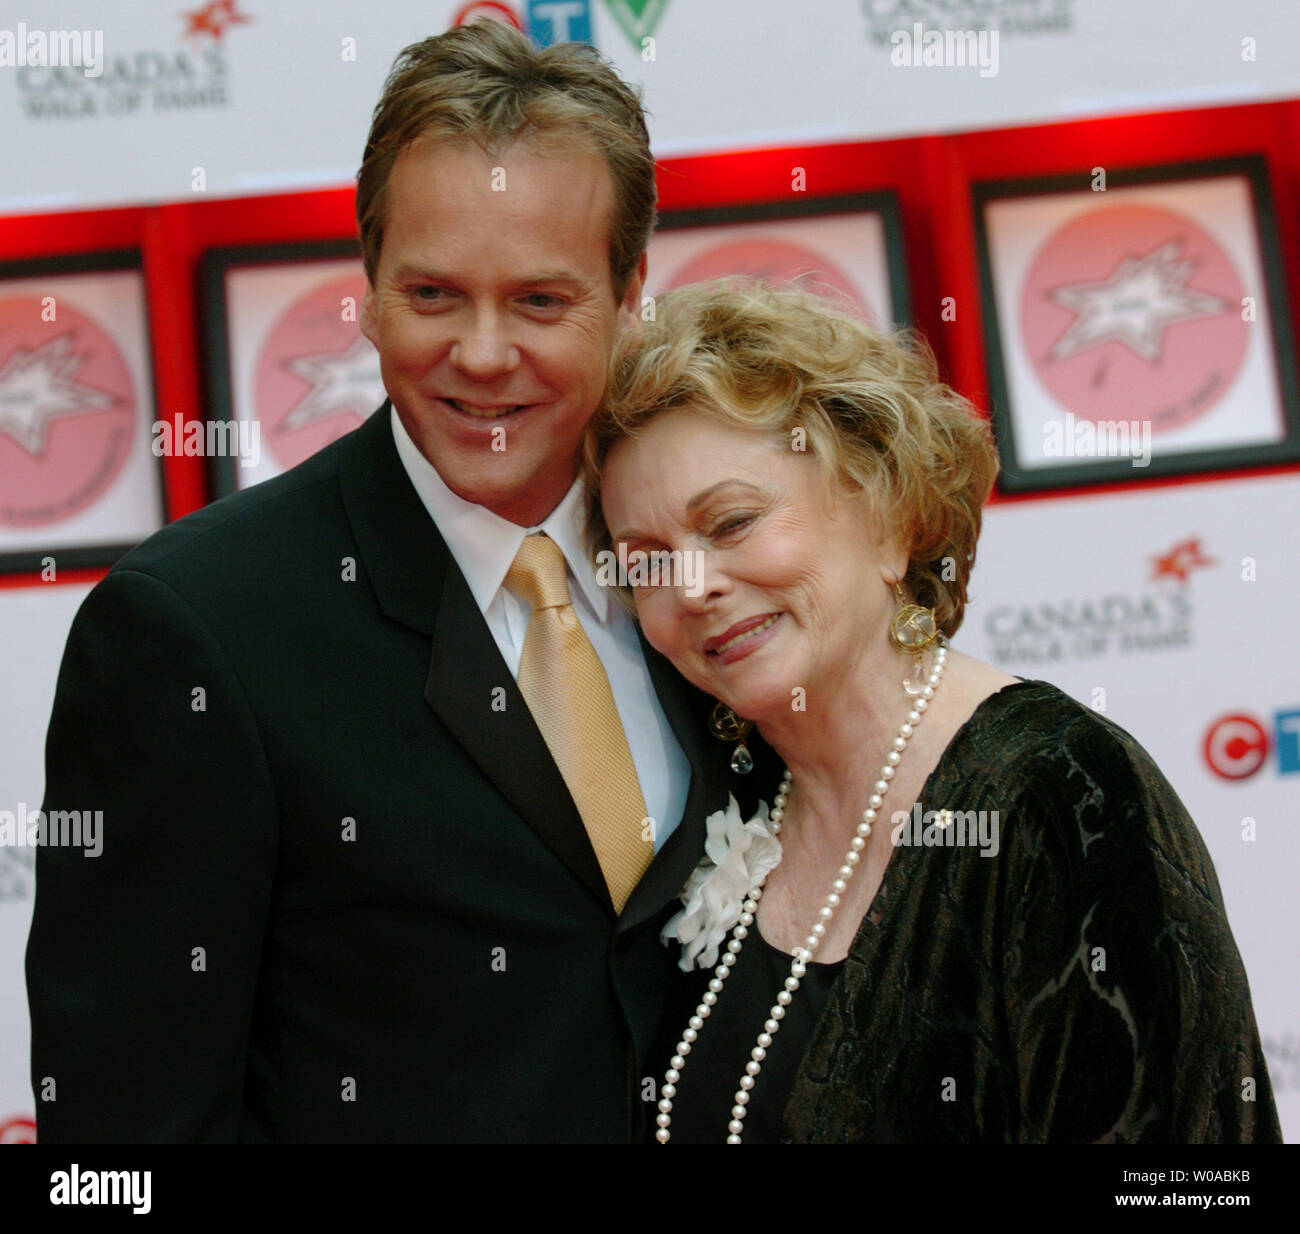 Kiefer Sutherland and his mother Shirley Douglas cuddle on the red carpet in front of the Elgin Theater after a star unveiling ceremony inducting Sutherland into Canada's Walk of Fame on June 5, 2005 in Toronto, Canada. Actors Douglas and Kiefer's father, Donald Sutherland, also have their own stars on the Walk of Fame, having been inducted in 2004 and 2000 respectively. (UPI Photo/Christine Chew) Stock Photo